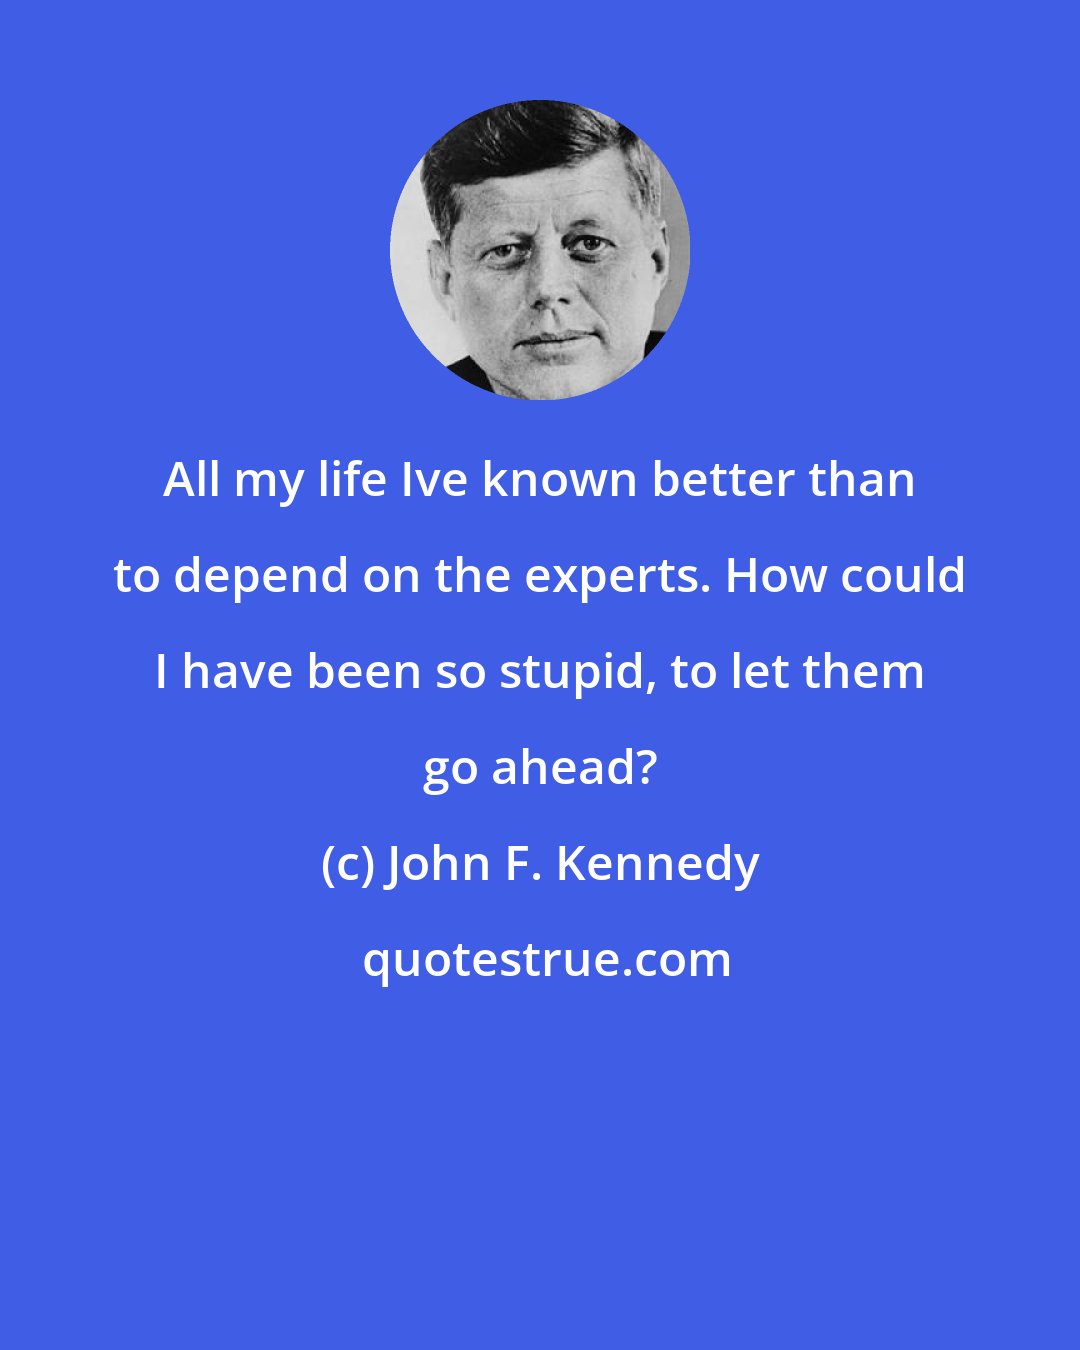 John F. Kennedy: All my life Ive known better than to depend on the experts. How could I have been so stupid, to let them go ahead?